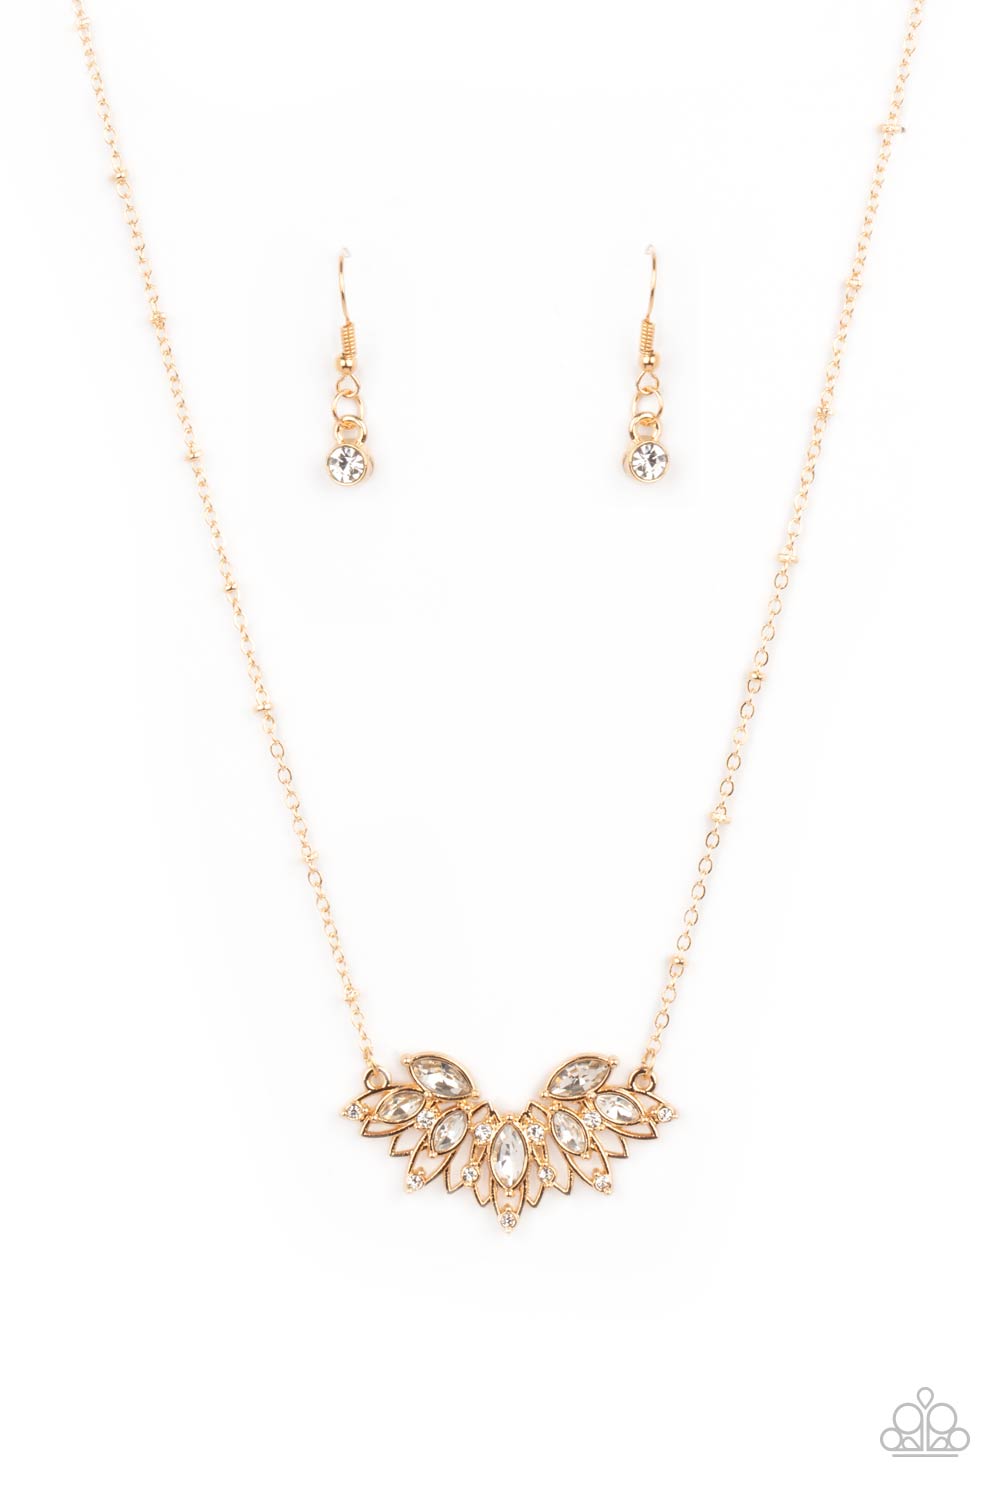 Deluxe Diadem - gold - Paparazzi necklace